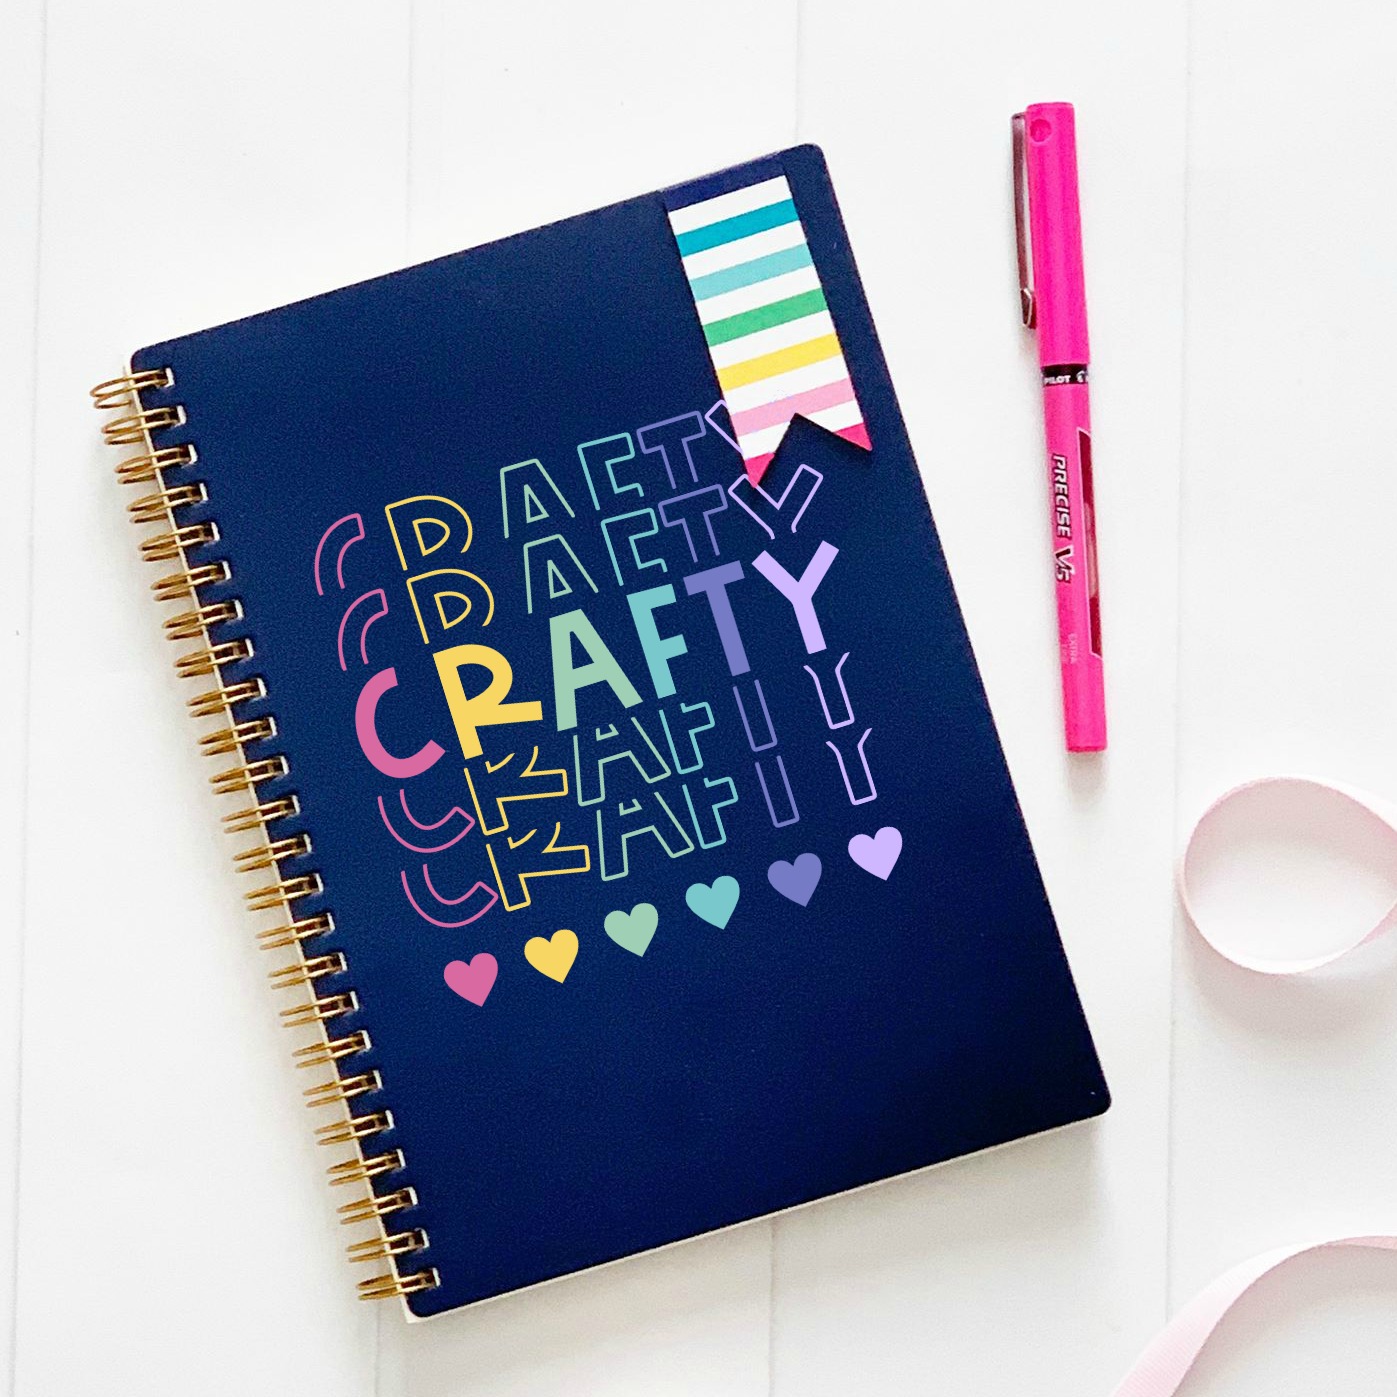 Download 13 Free Craft SVG Files- Our Gift To You! - Hello Creative Family